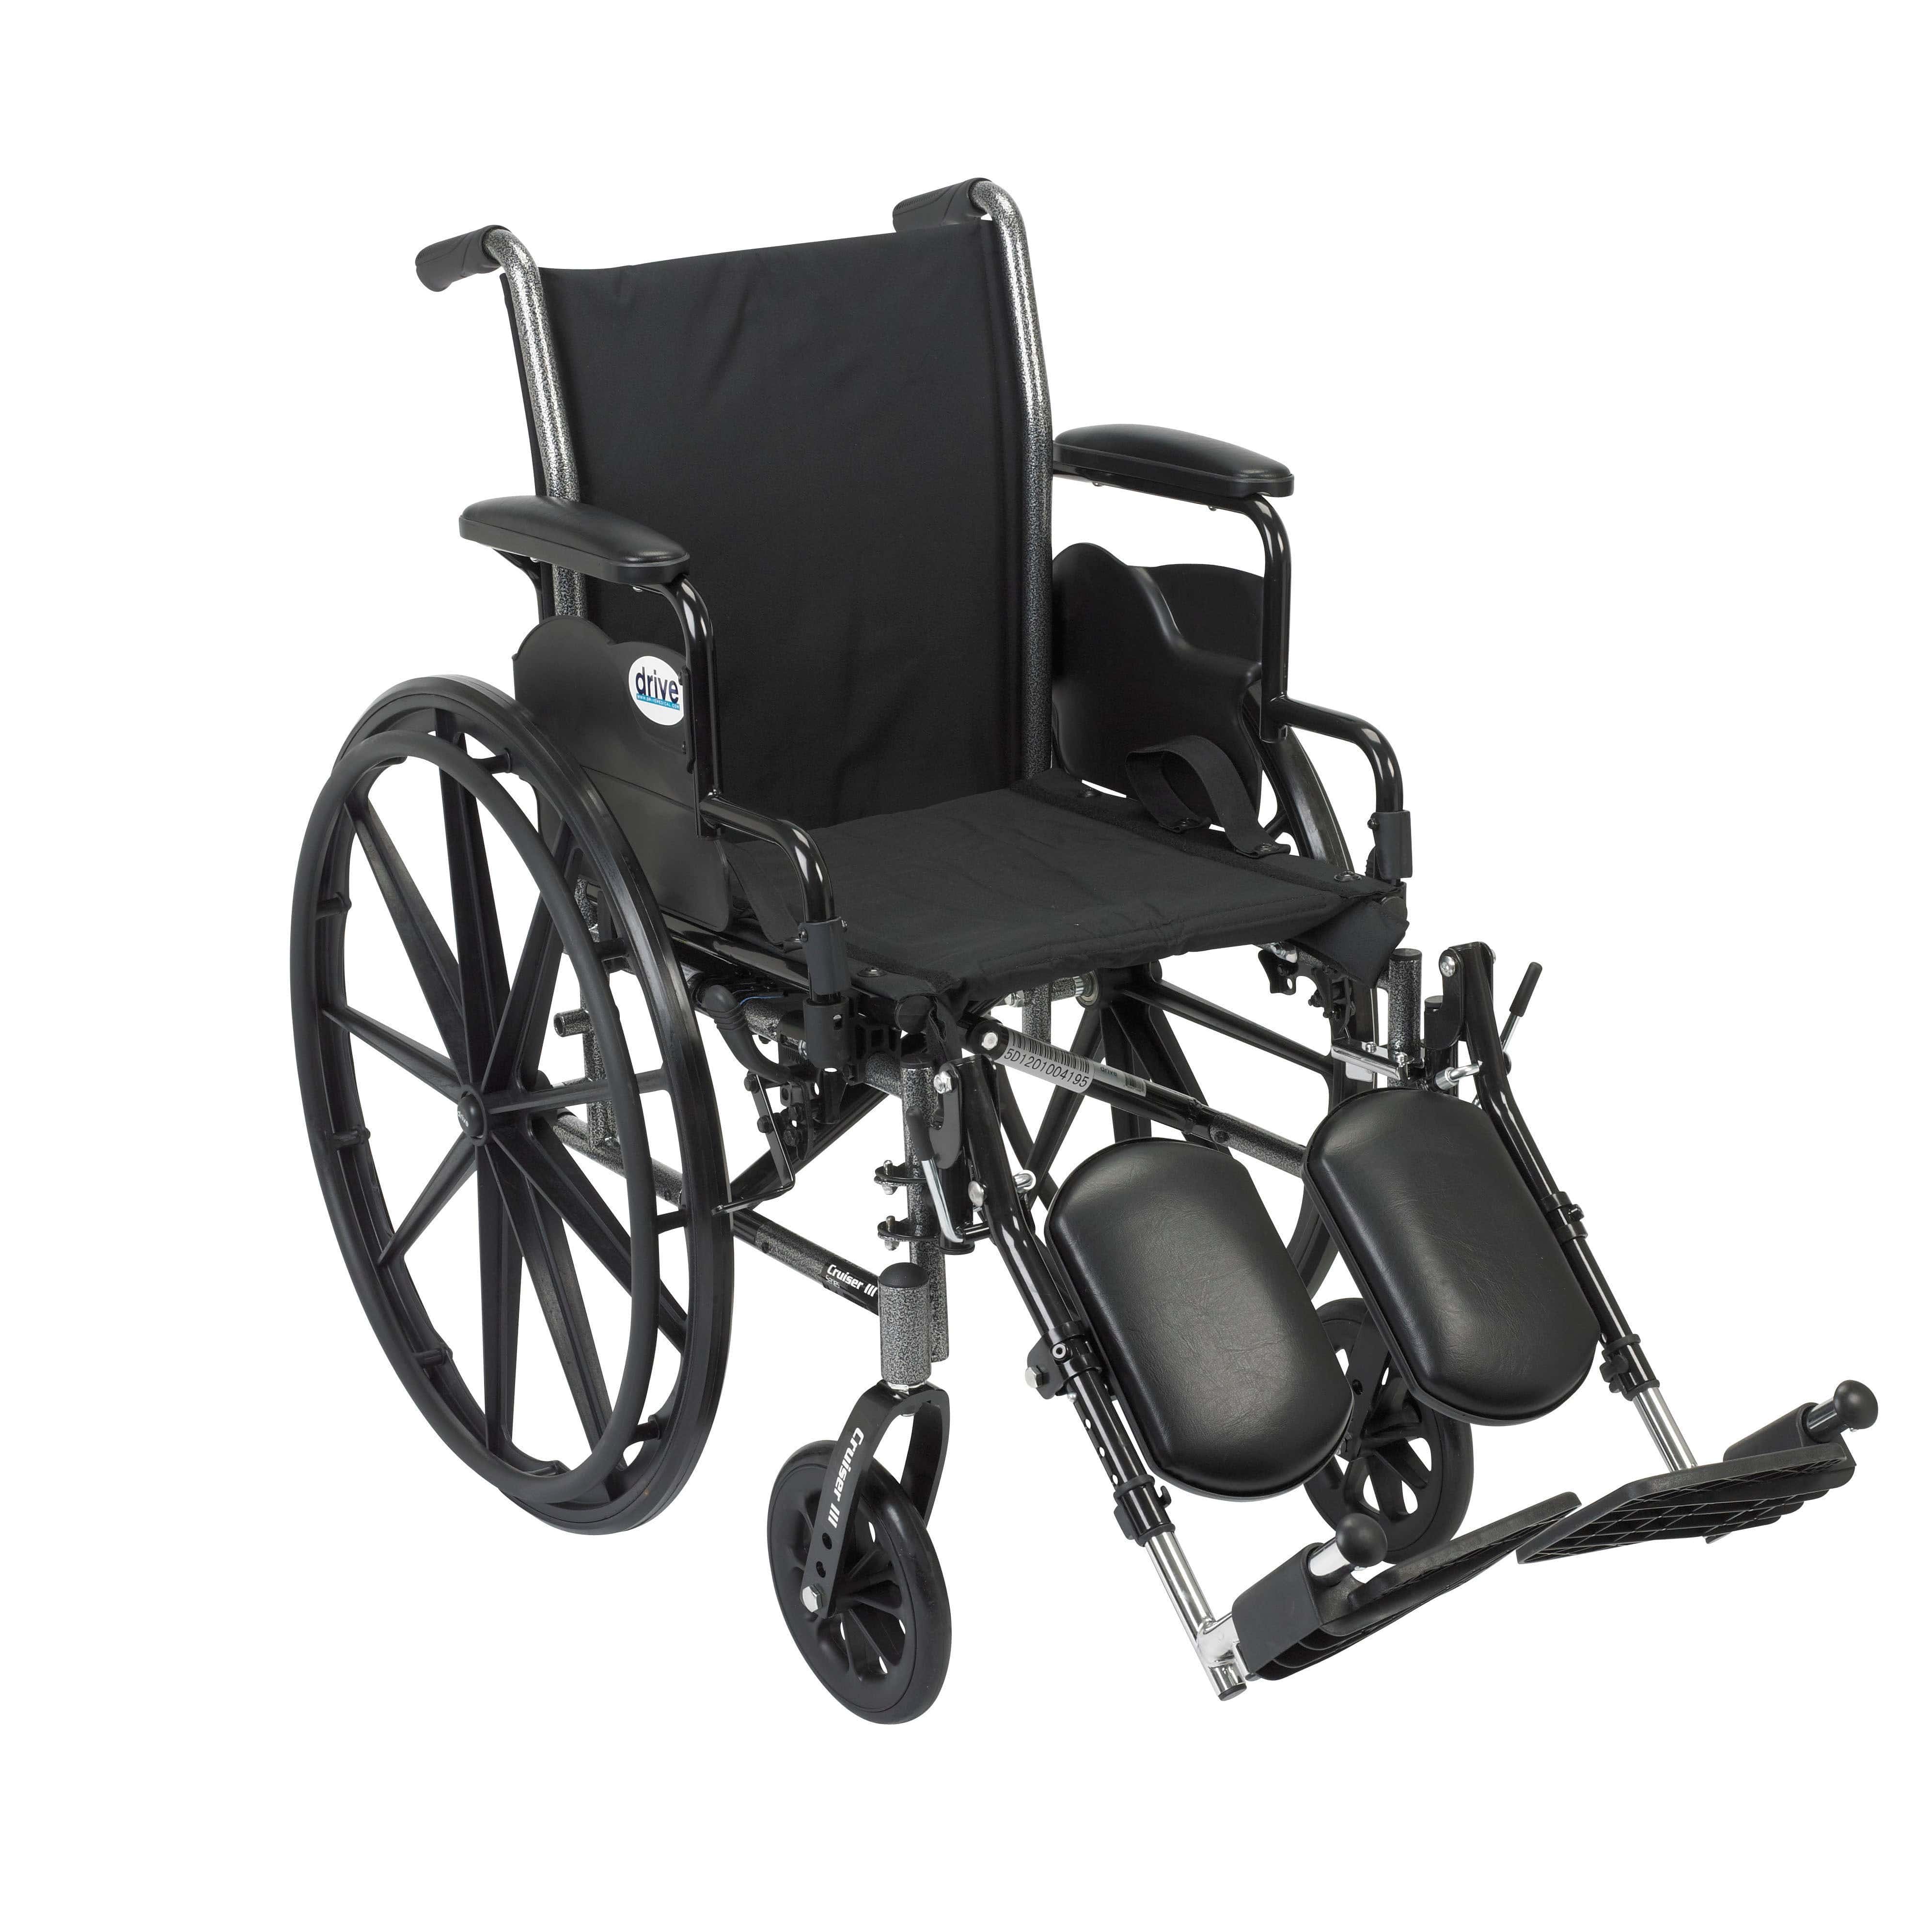 Drive Medical Wheelchairs Flip Back Removable Desk Arms and Elevating Leg Rests / 20" Seat Drive Medical Cruiser III Light Weight Wheelchair with Flip Back Removable Arms